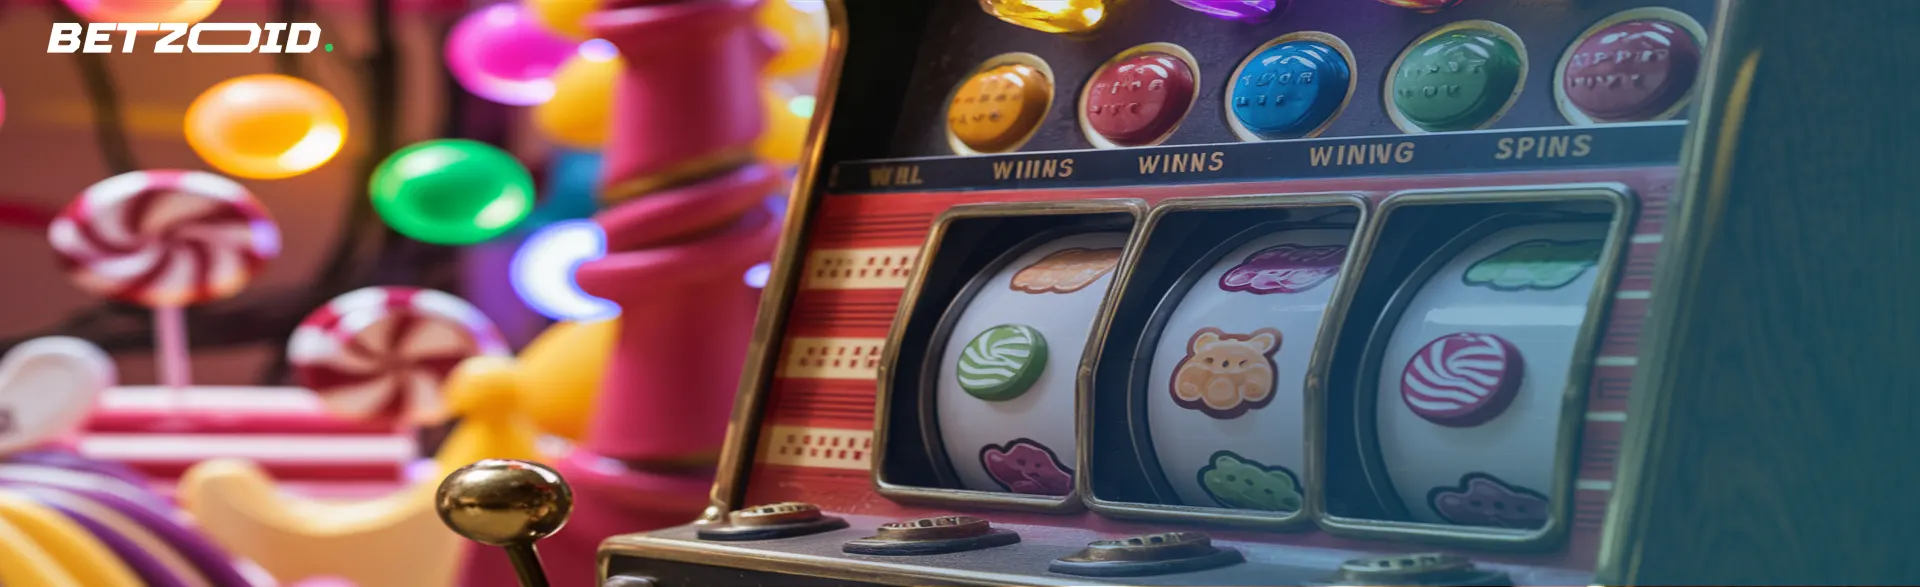 Games at Cryptoсurrency Casino.